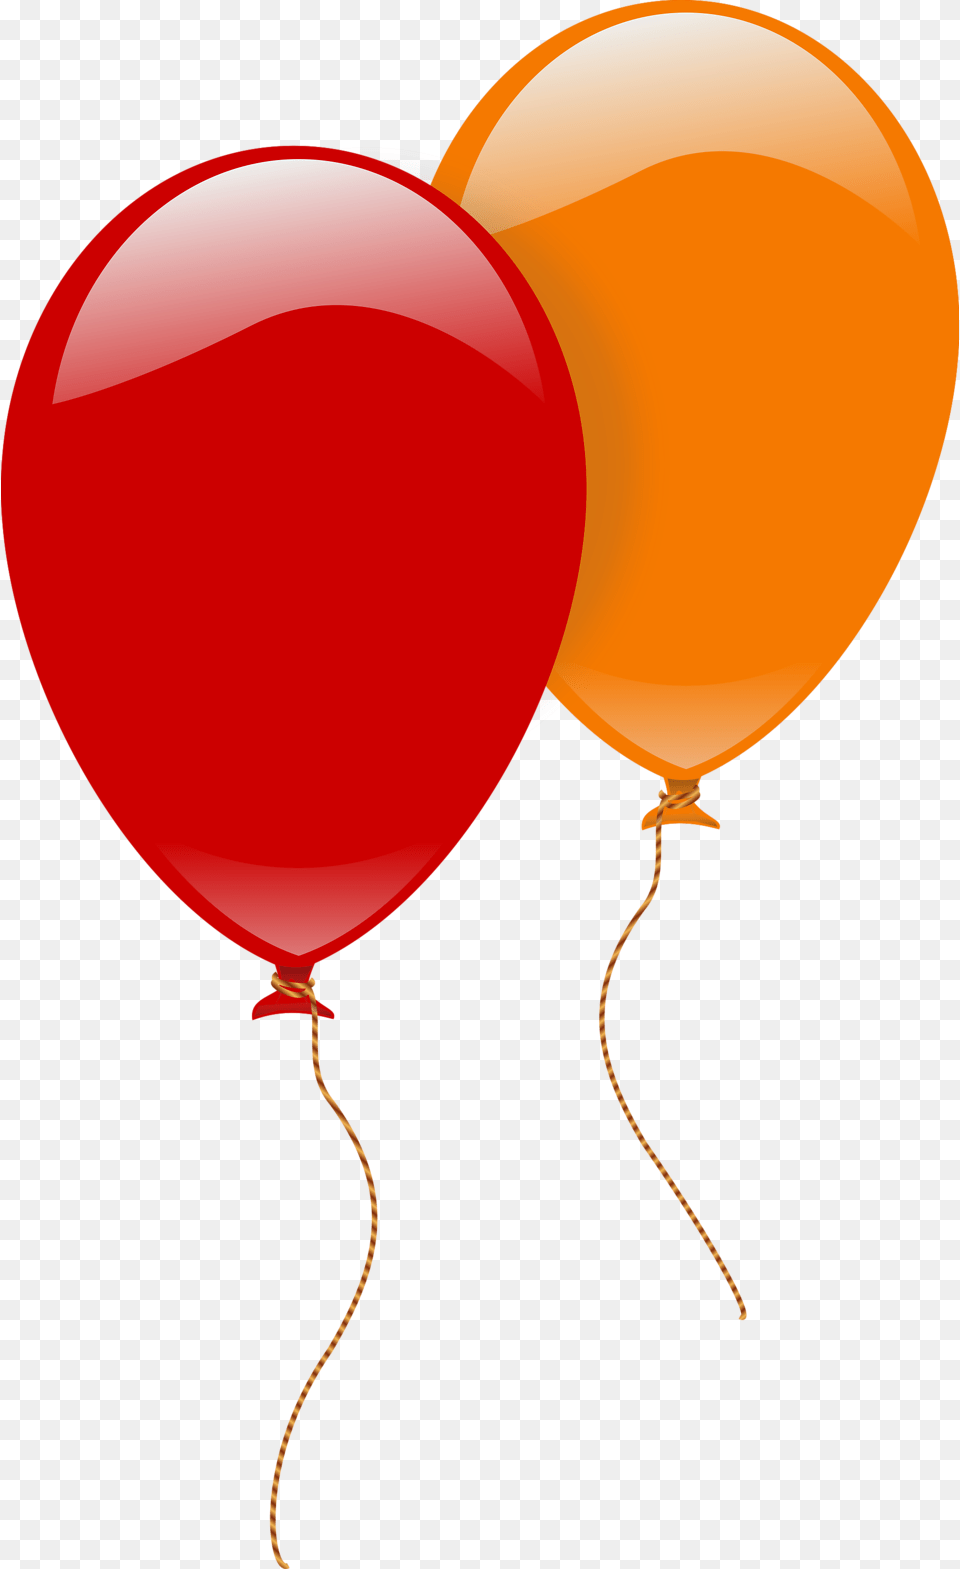 Stock Photo Illustration Of A Red And An Orange Balloon Free Png Download